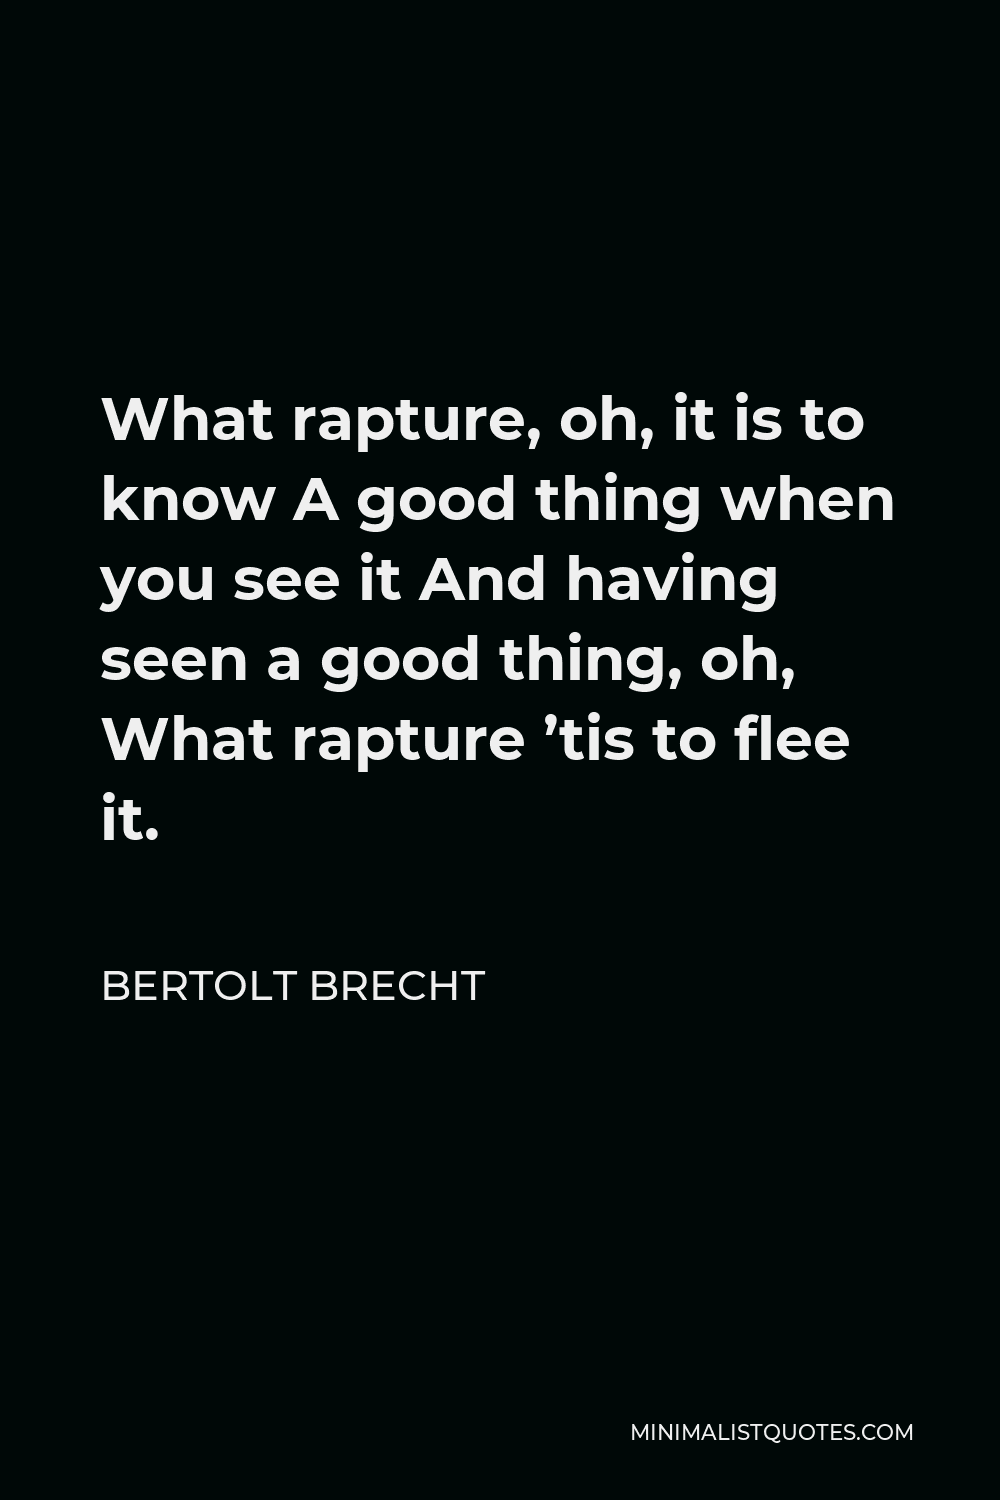 Bertolt Brecht Quote - What rapture, oh, it is to know A good thing when you see it And having seen a good thing, oh, What rapture ’tis to flee it.